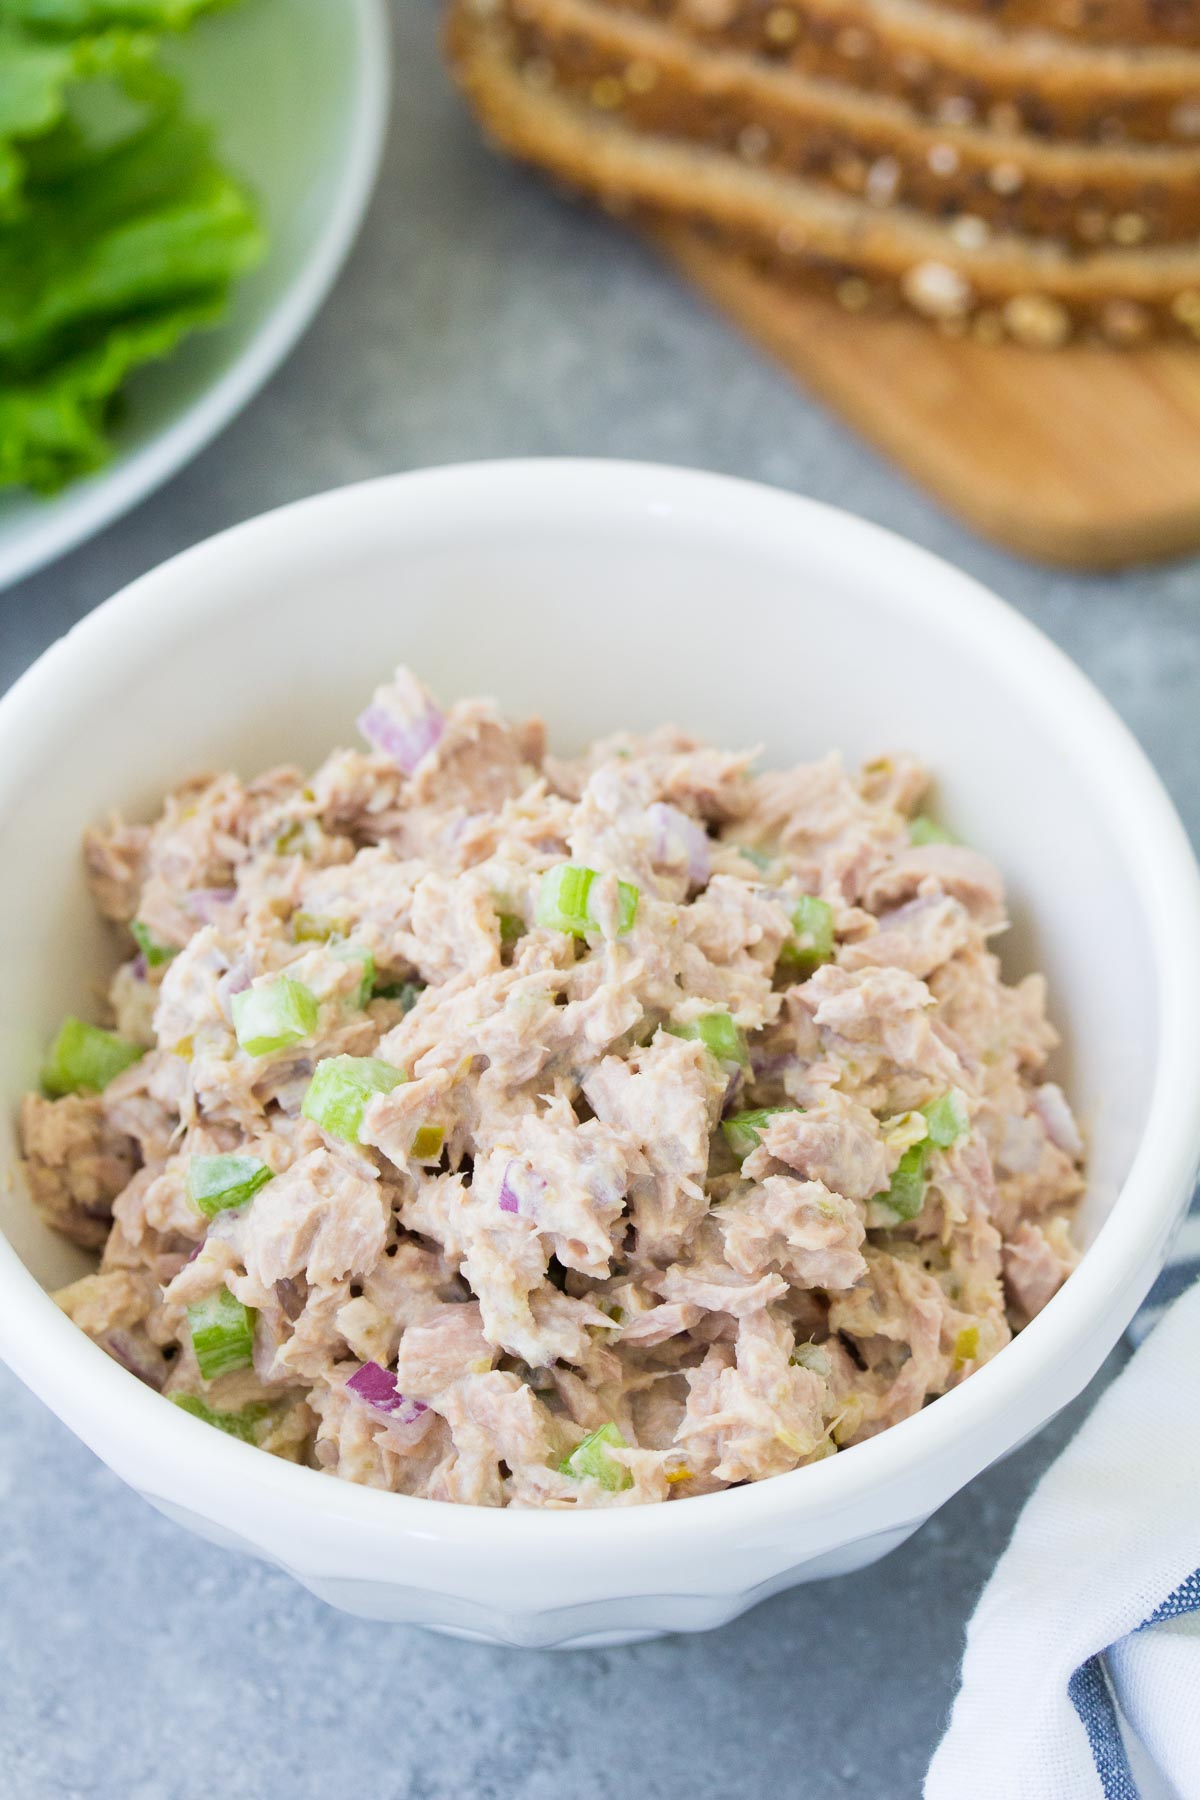 Tuna salad in a bowl with lettuce and bread slices in background.